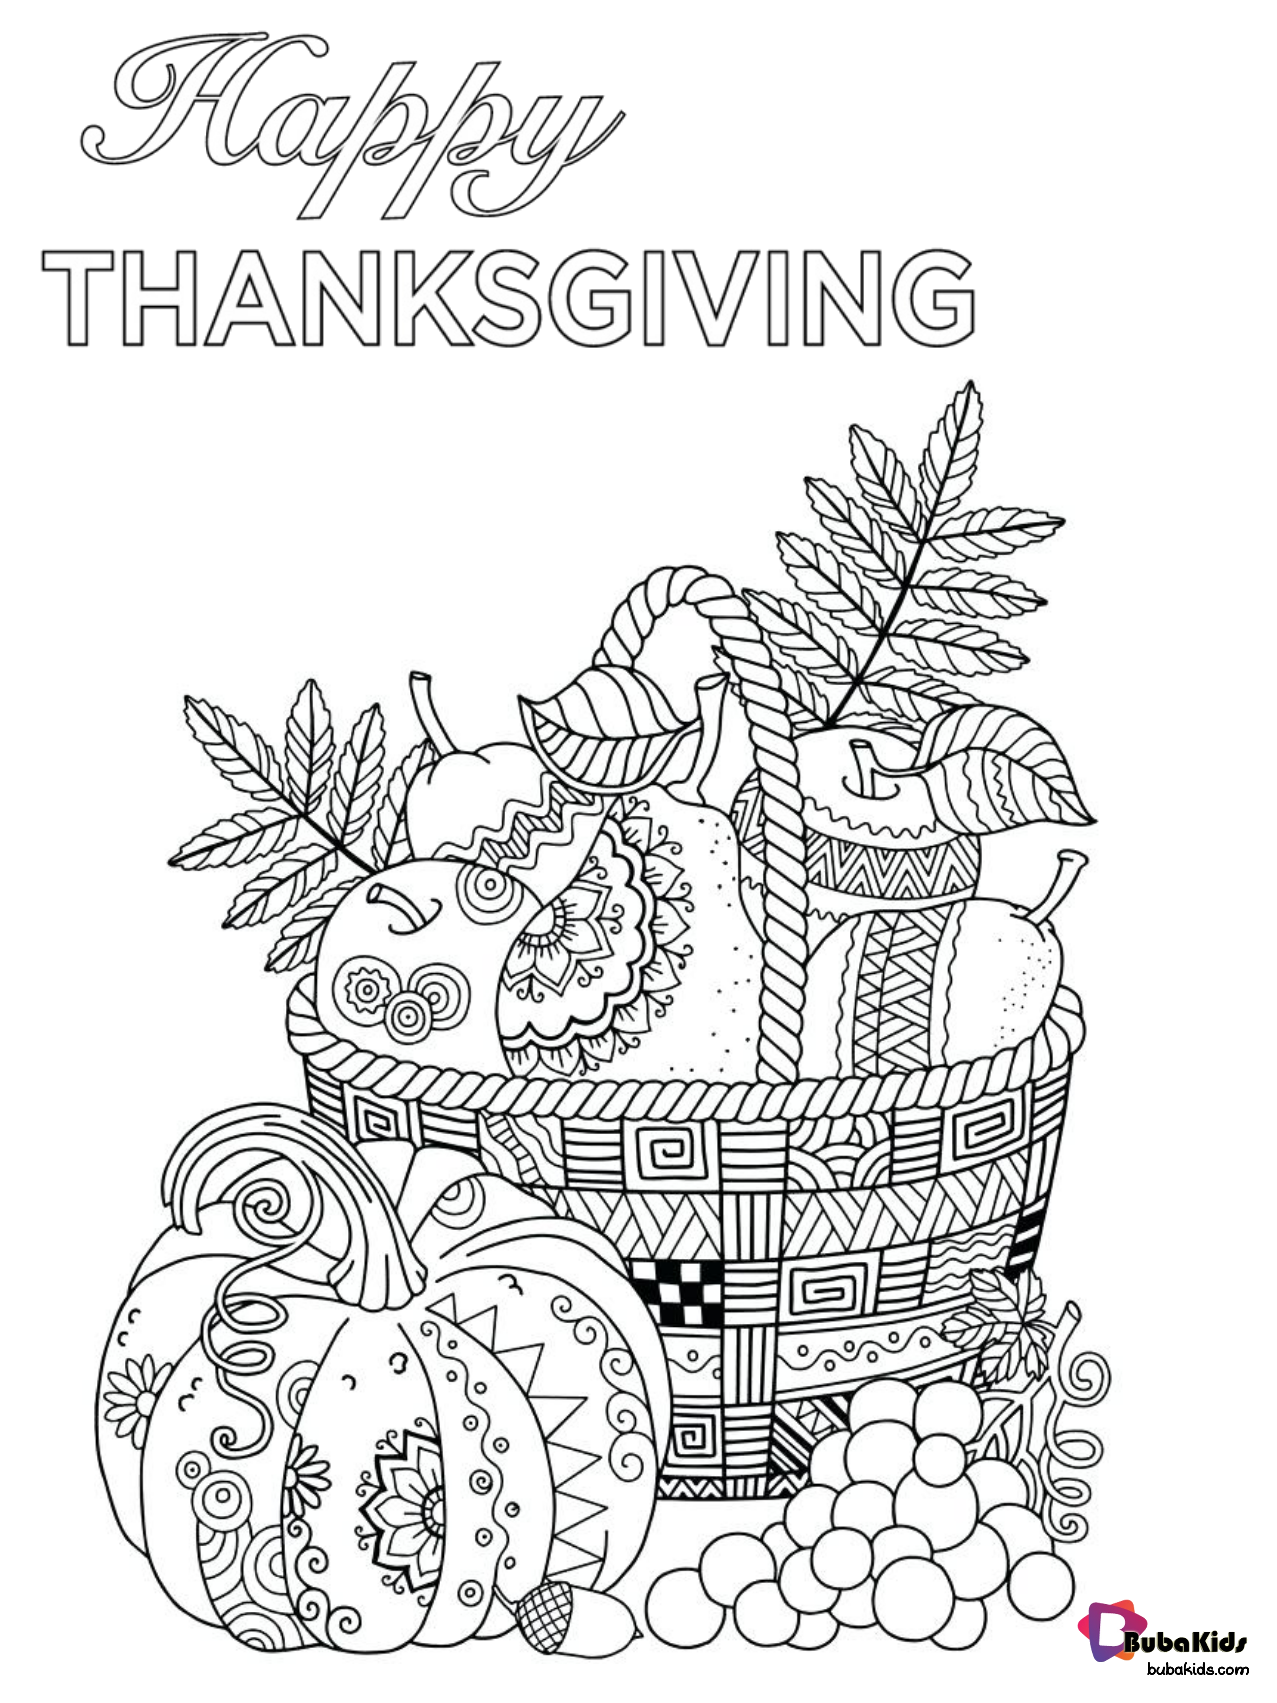 Free download and printable Happy Thanksgiving coloring page. Wallpaper